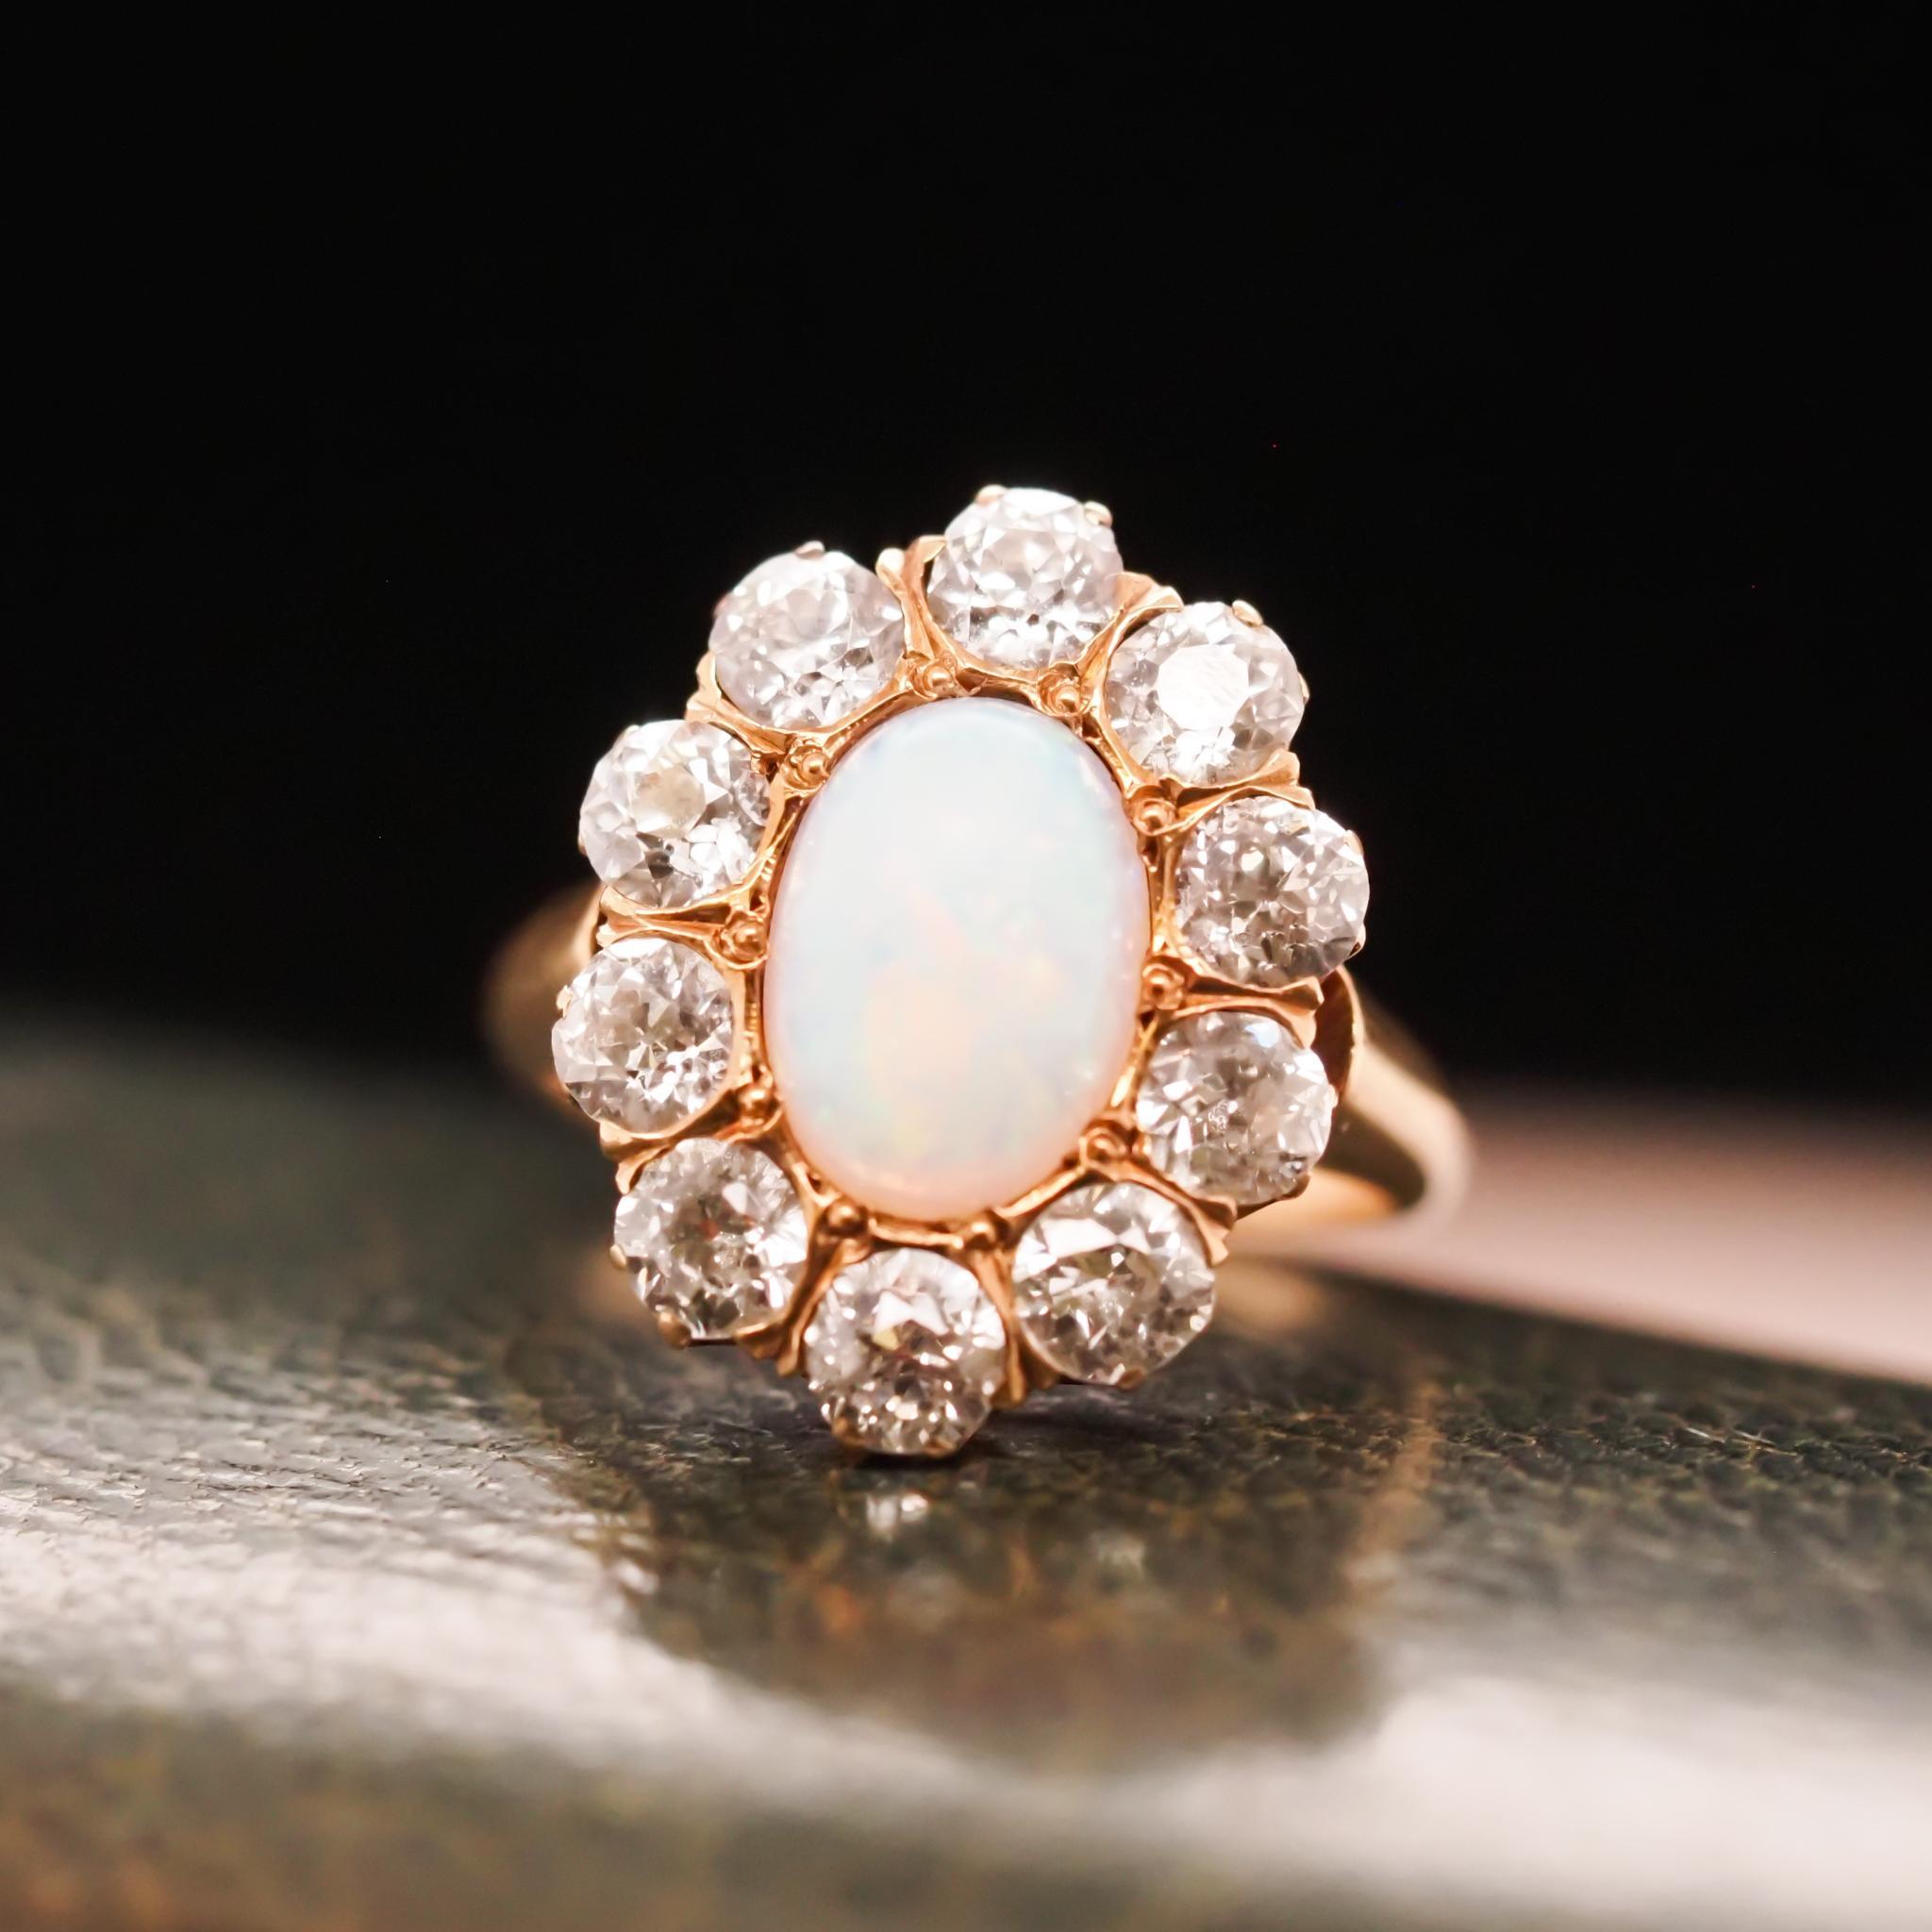 Item Details:
Year: 1900s
Ring Size: 5 (Sizable)
Metal Type: 14K Yellow Gold [Hallmarked, and Tested]
Weight: 5.0grams
Opal Details: Australian Opal, All Colors in color play, 9x6mm
Side Stone Details: 2.20ct total of Old European Brilliant